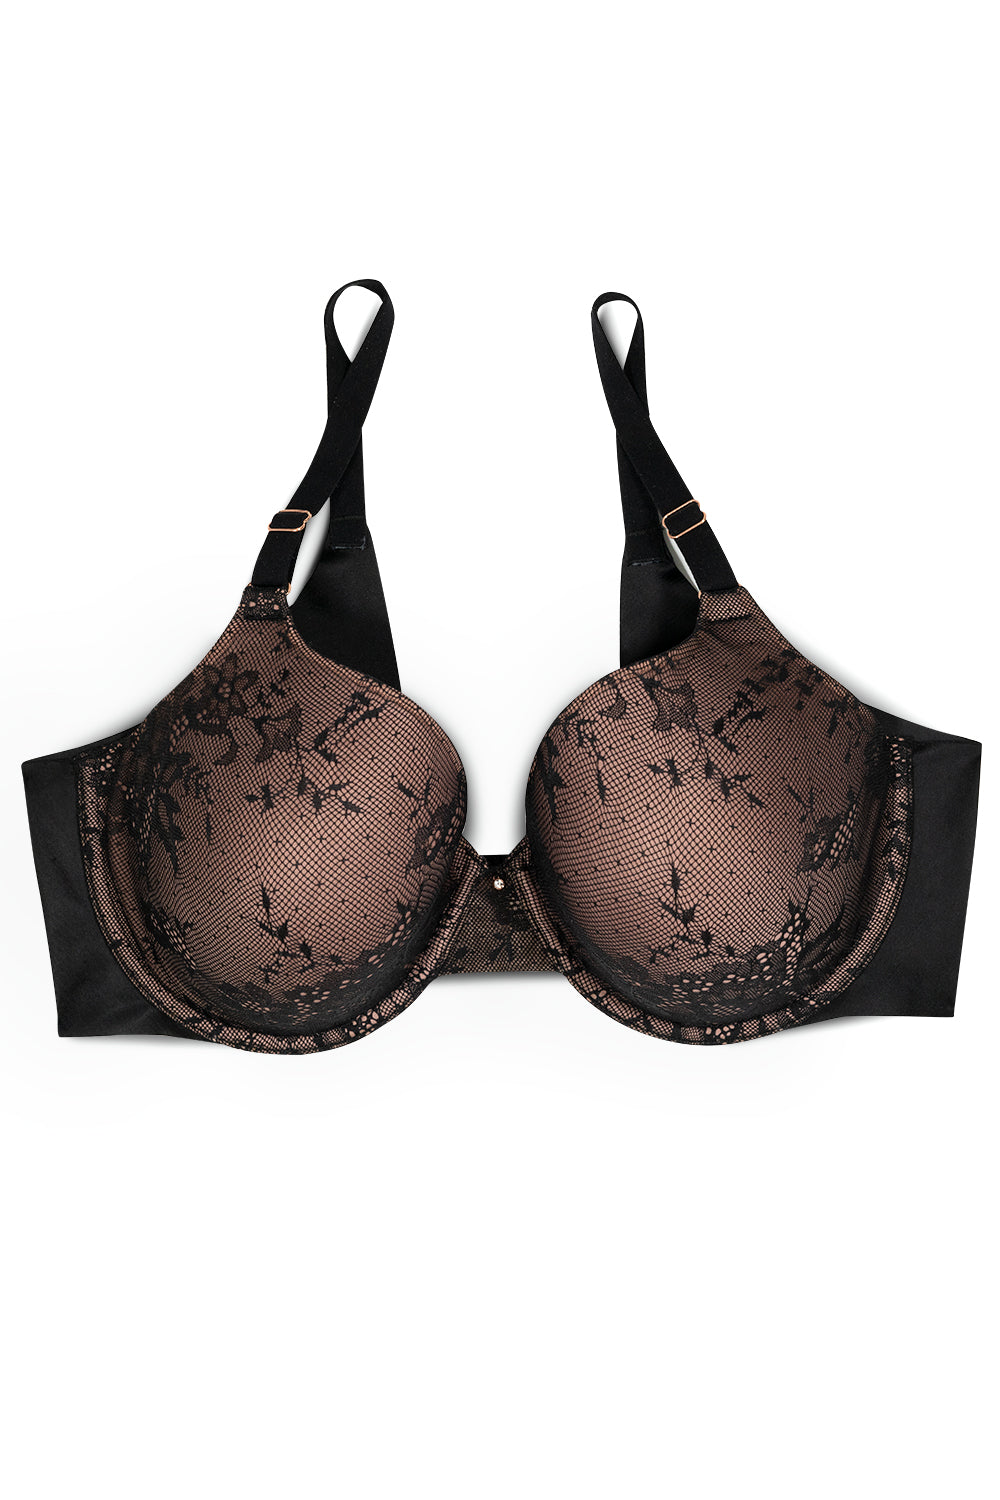 Smart & Sexy Smooth Lace T-shirt Bra Black Hue W/ Ballet Fever (smooth  Lace) 36d : Target